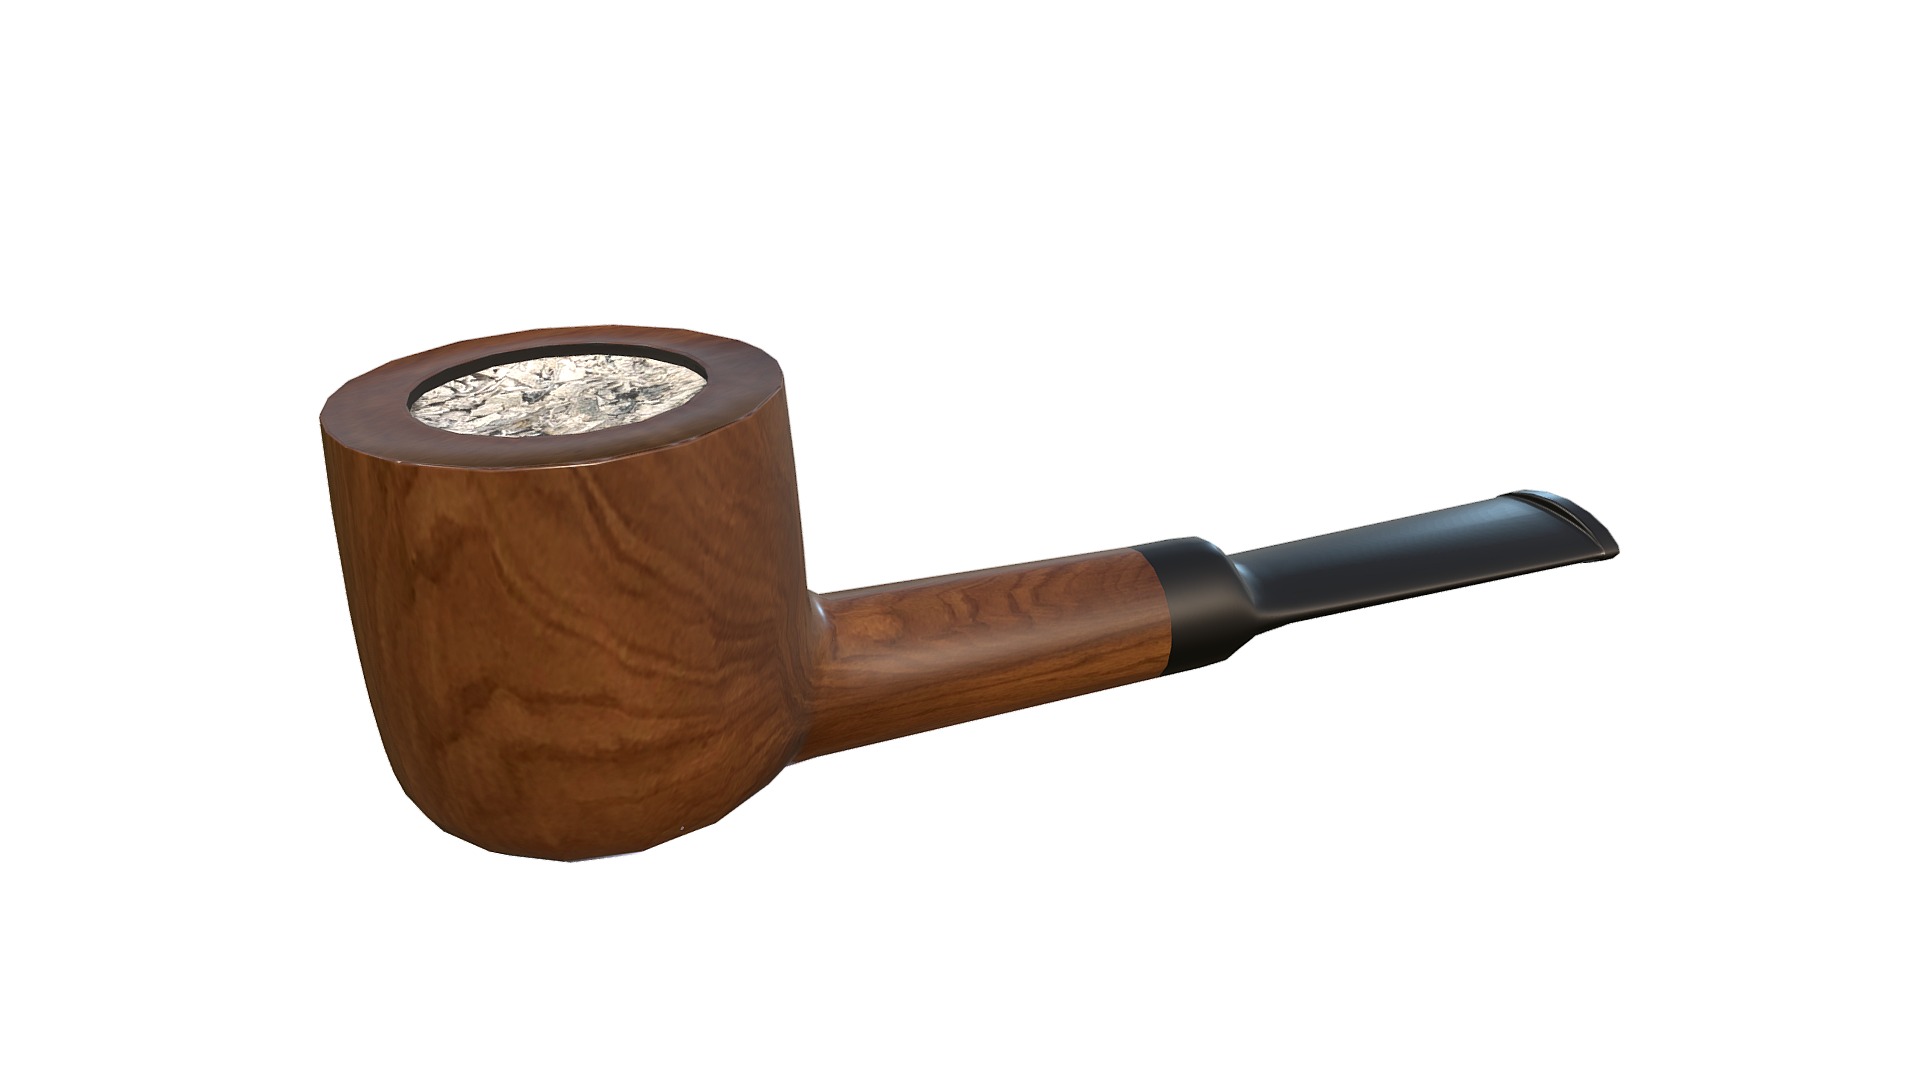 3D model Derbyshire 917 Tobacco Pipe - This is a 3D model of the Derbyshire 917 Tobacco Pipe. The 3D model is about a wooden gavel with a black handle.